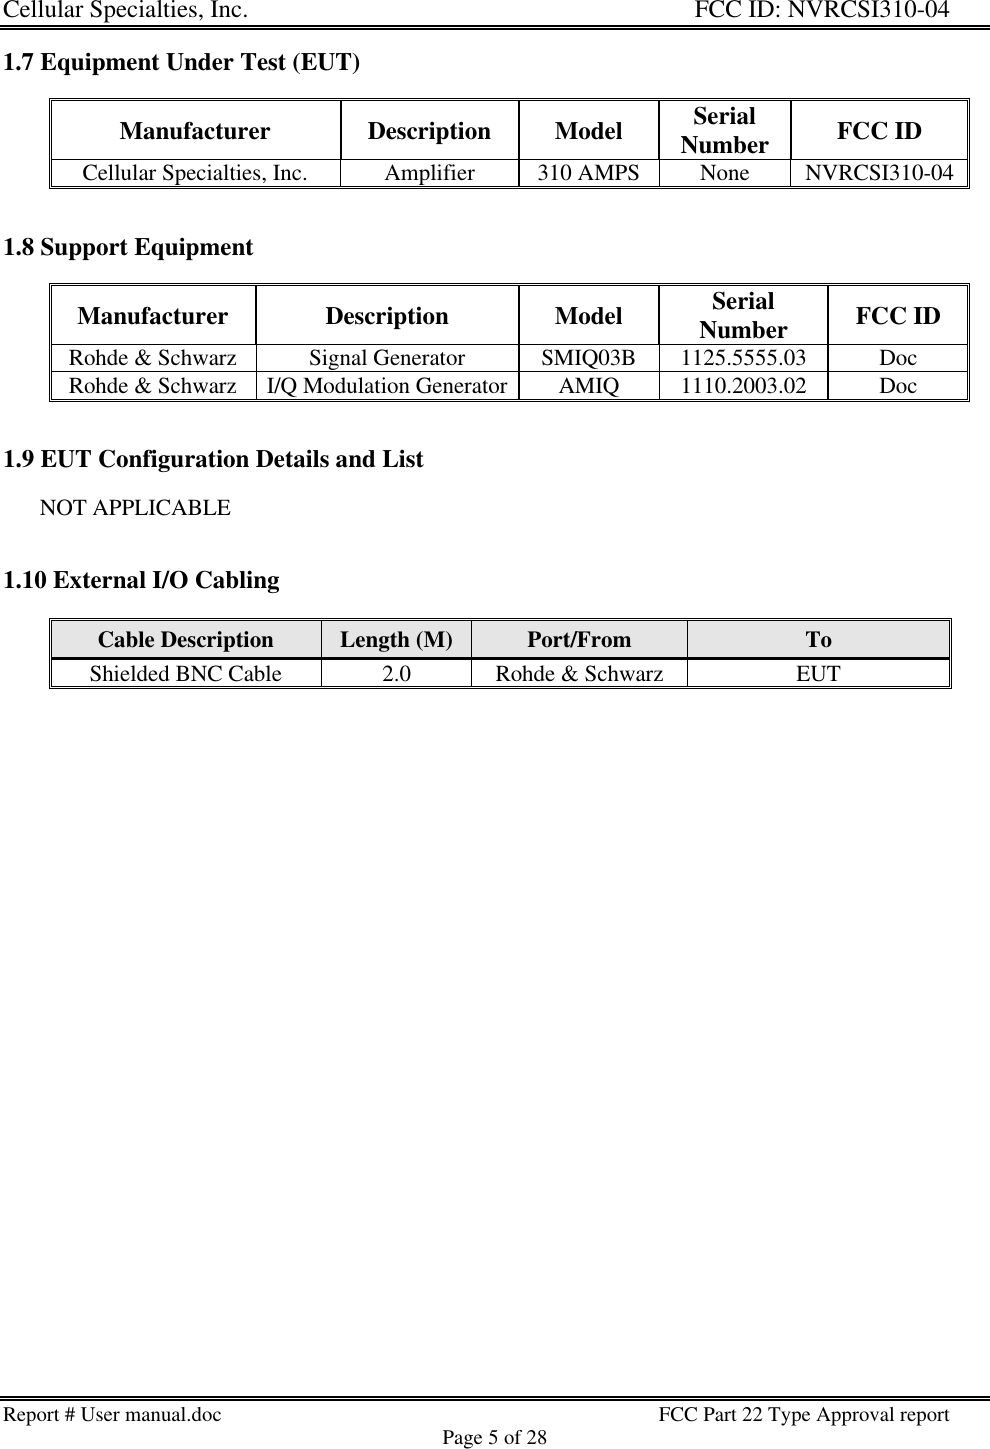 Cellular Specialties, Inc. FCC ID: NVRCSI310-04Report # User manual.doc FCC Part 22 Type Approval reportPage 5 of 281.7 Equipment Under Test (EUT)Manufacturer Description Model SerialNumber FCC IDCellular Specialties, Inc. Amplifier 310 AMPS None NVRCSI310-041.8 Support EquipmentManufacturer Description Model SerialNumber FCC IDRohde &amp; Schwarz Signal Generator SMIQ03B 1125.5555.03 DocRohde &amp; Schwarz I/Q Modulation Generator AMIQ 1110.2003.02 Doc1.9 EUT Configuration Details and List       NOT APPLICABLE1.10 External I/O CablingCable Description Length (M) Port/From ToShielded BNC Cable 2.0 Rohde &amp; Schwarz EUT